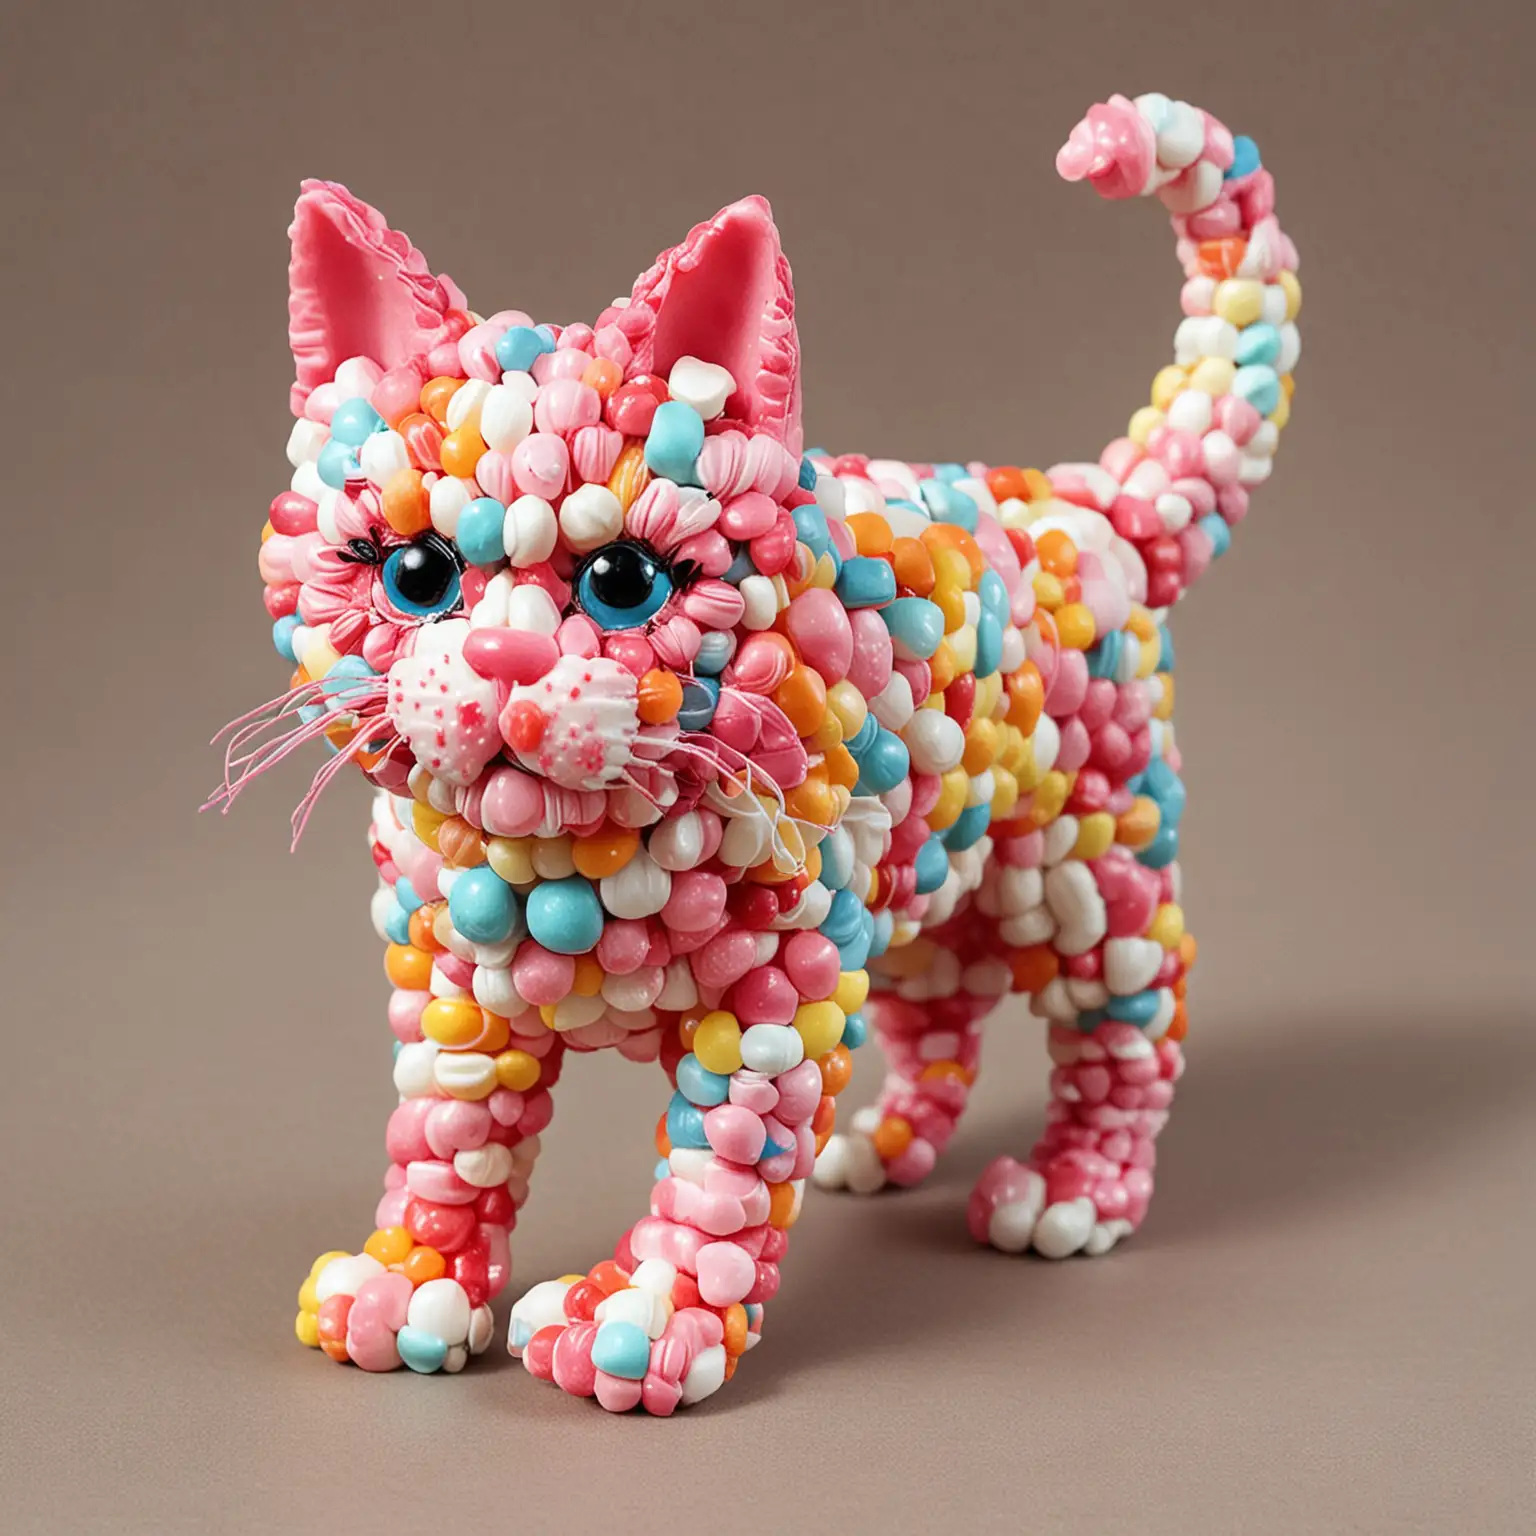 Candy-Cat-Sculpture-Playful-Feline-Crafted-Entirely-from-Sweet-Treats